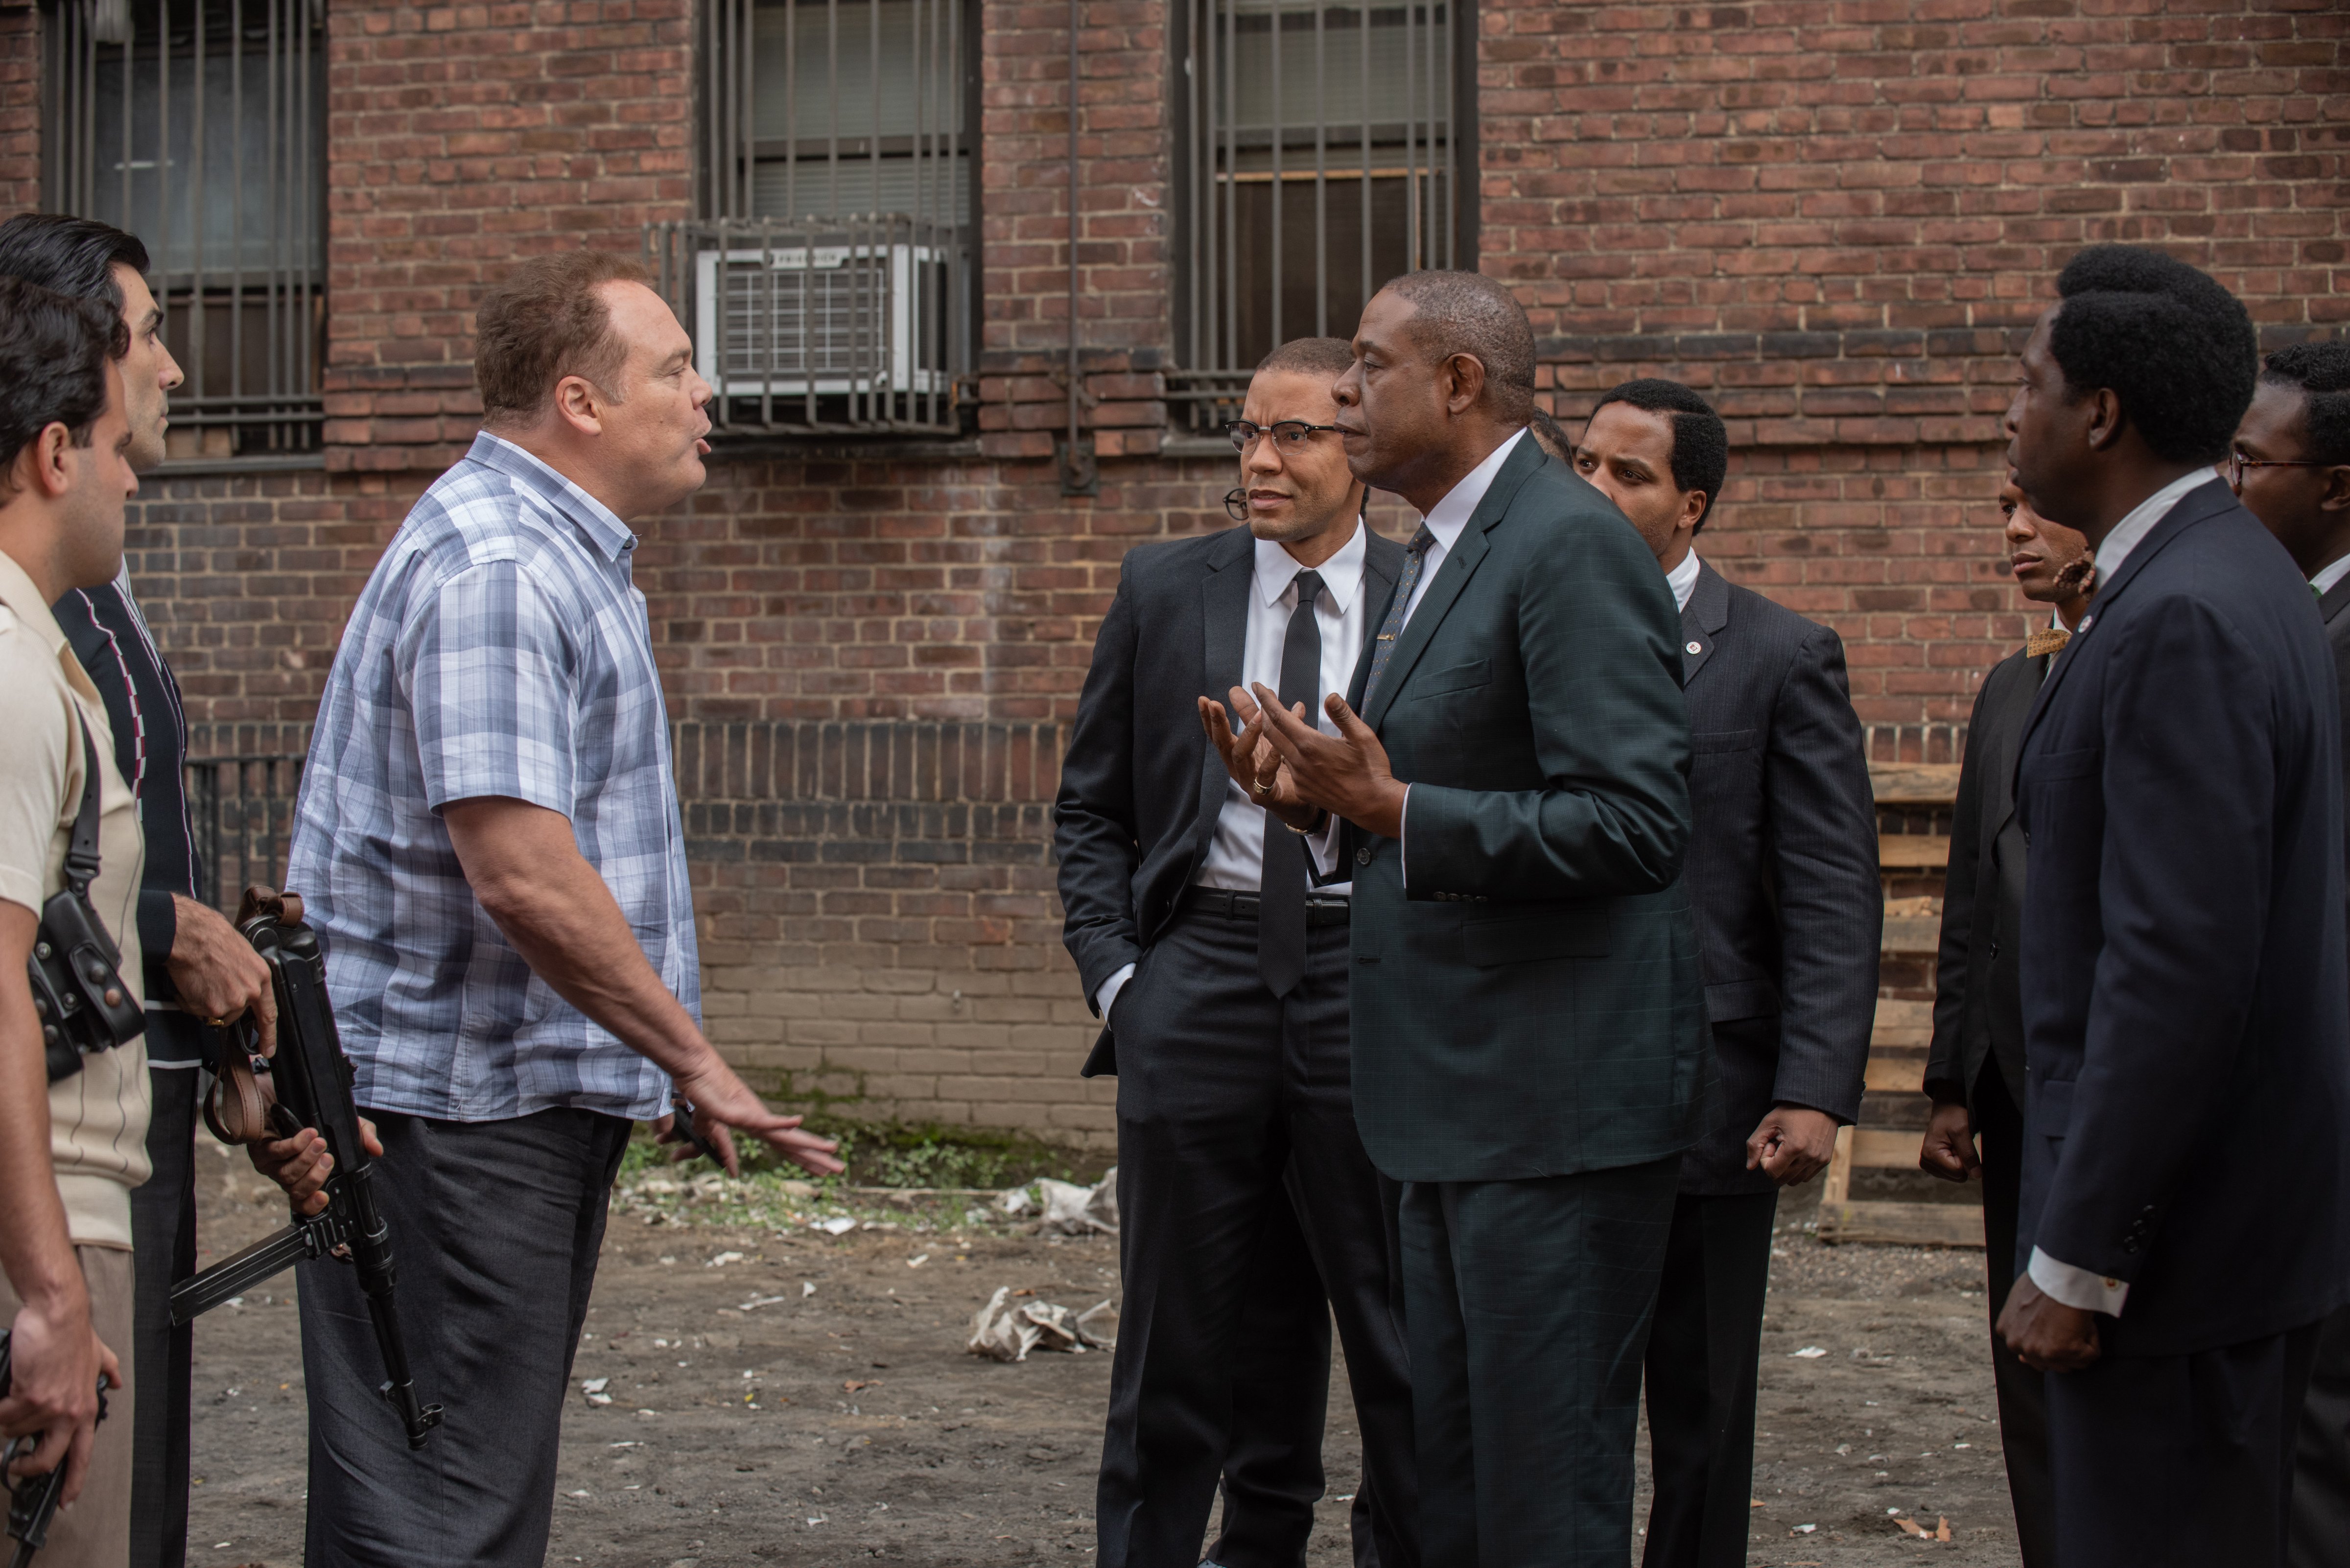 Vincent “Chin” Gigante (Vincent D’onofrio) and "Bumpy" Johnson (Forest Whitaker) square off. (Photo Courtesy David Lee/EPIX)